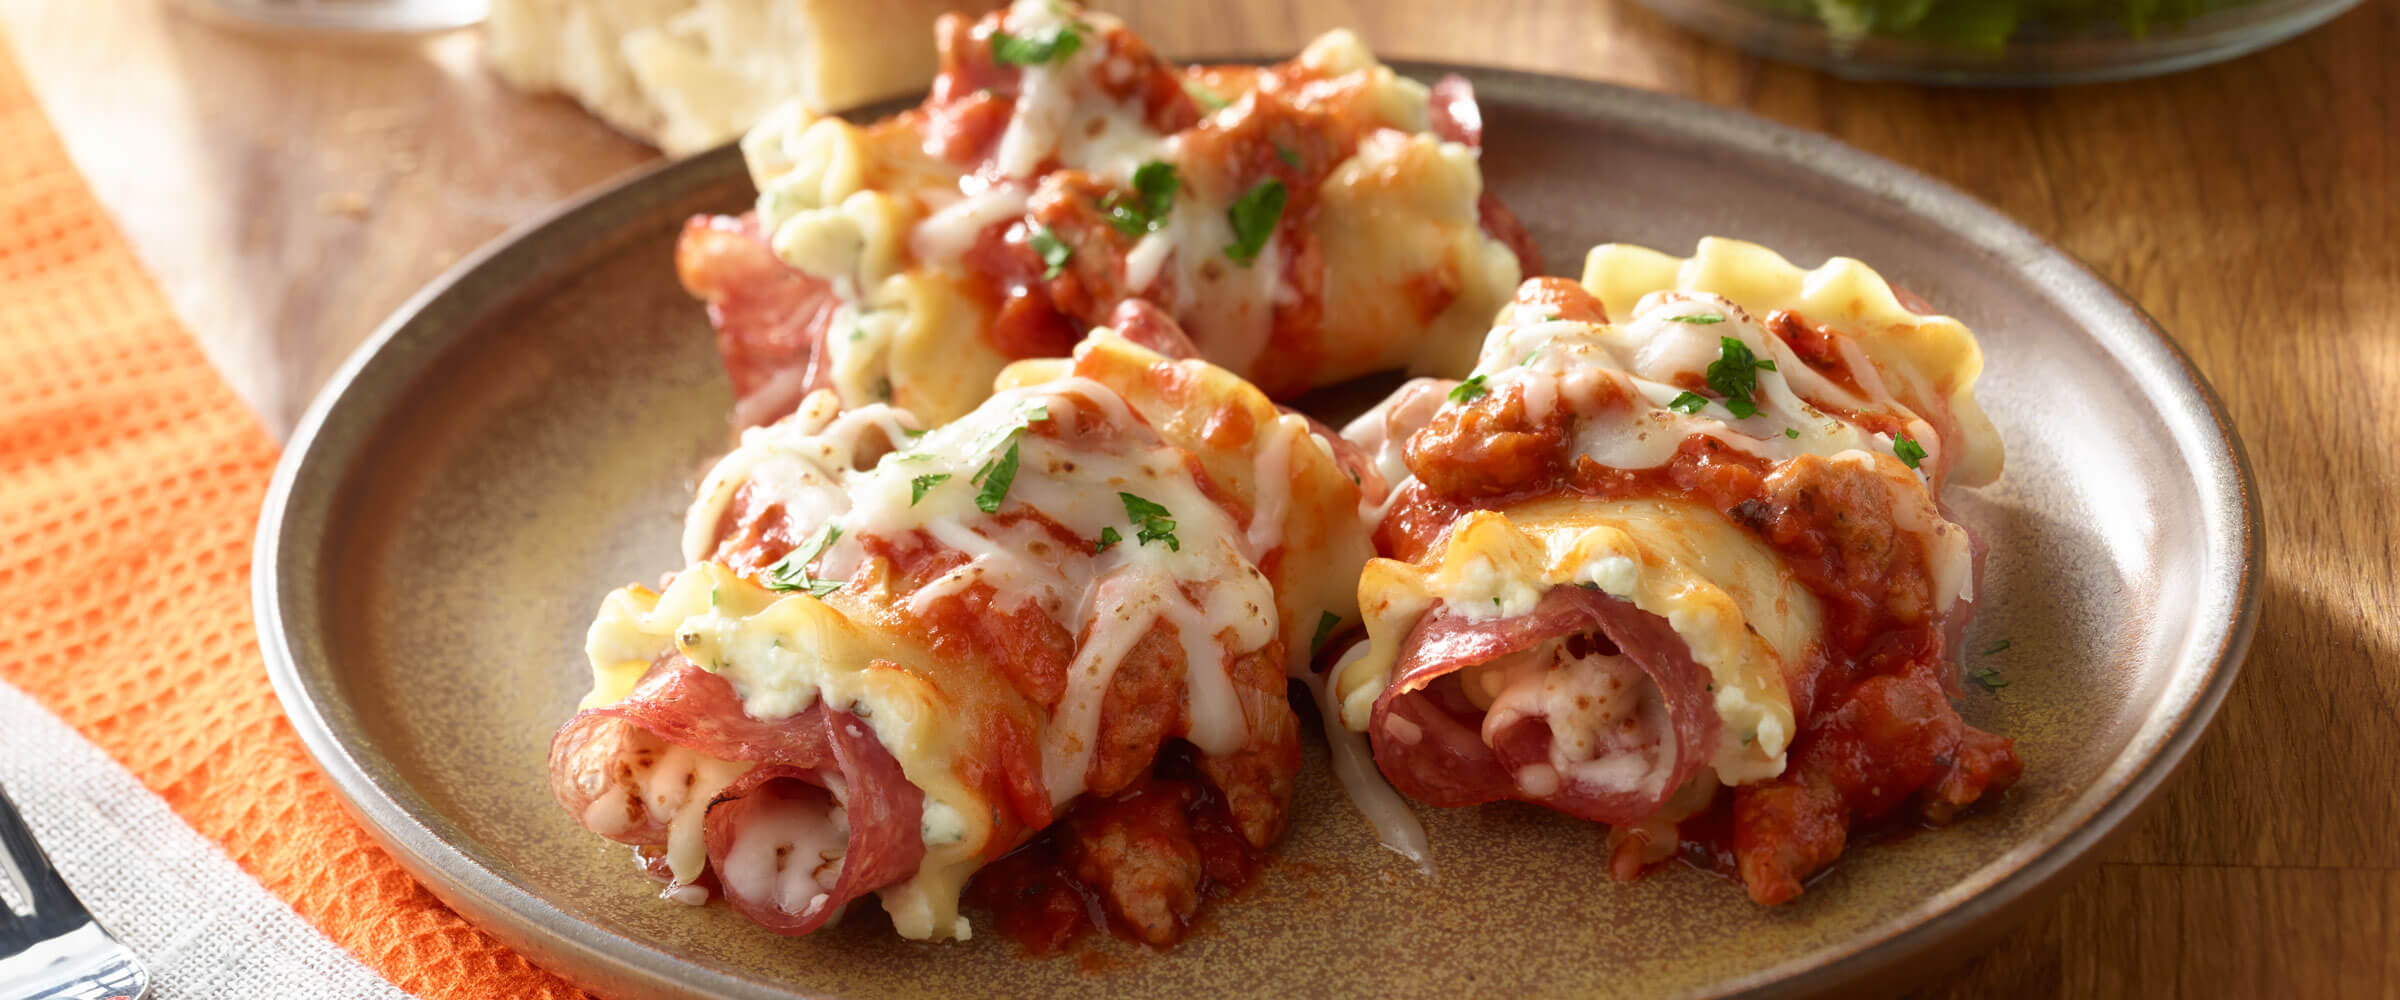 Salami and Sausage Lasagna Rolls topped with cheese and garnish on plate